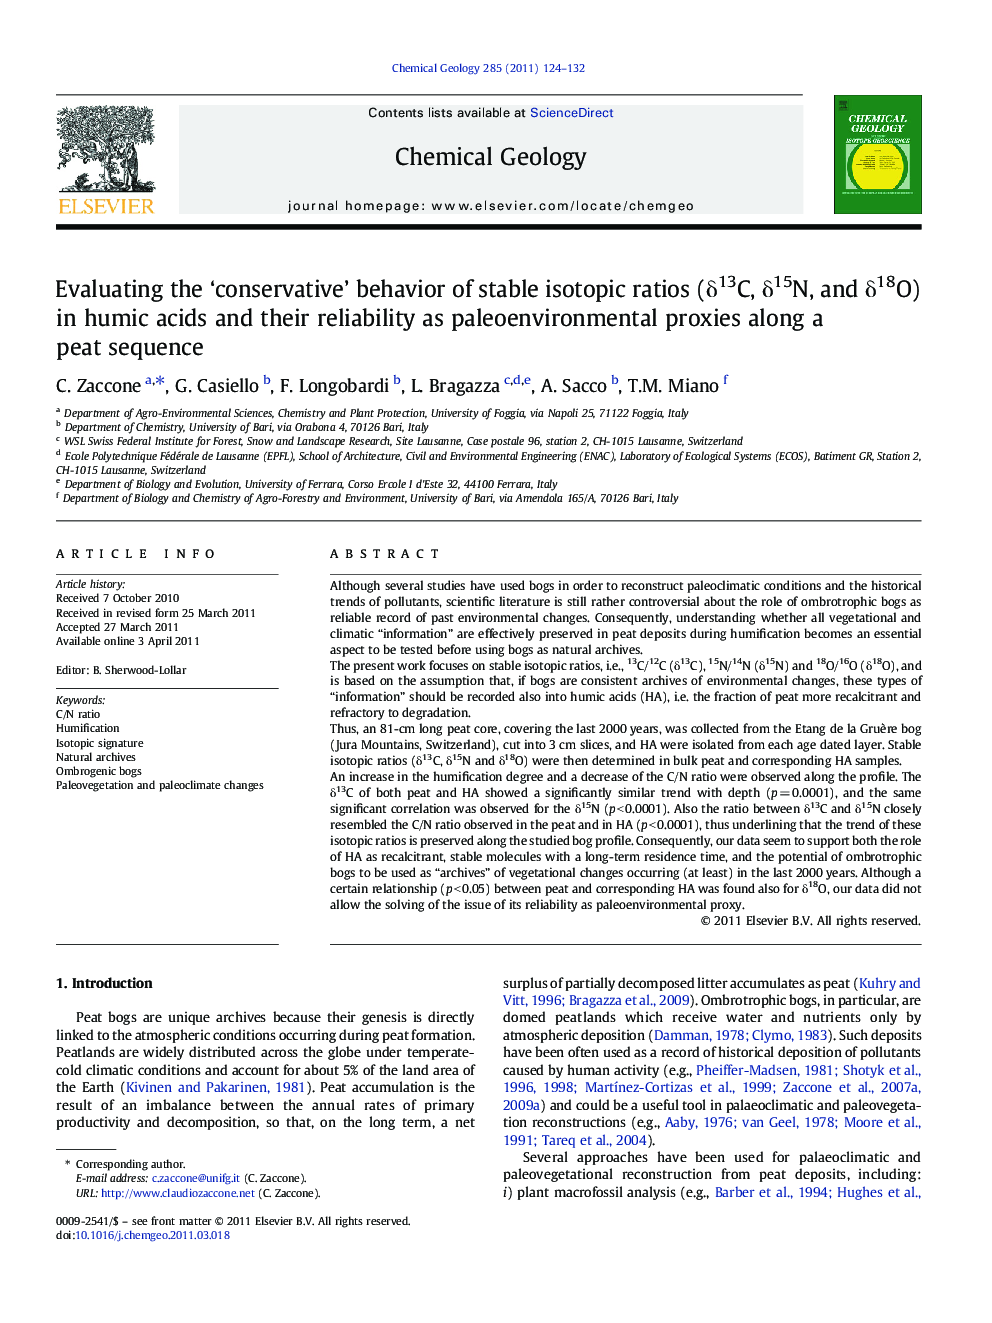 Evaluating the ‘conservative’ behavior of stable isotopic ratios (δ13C, δ15N, and δ18O) in humic acids and their reliability as paleoenvironmental proxies along a peat sequence